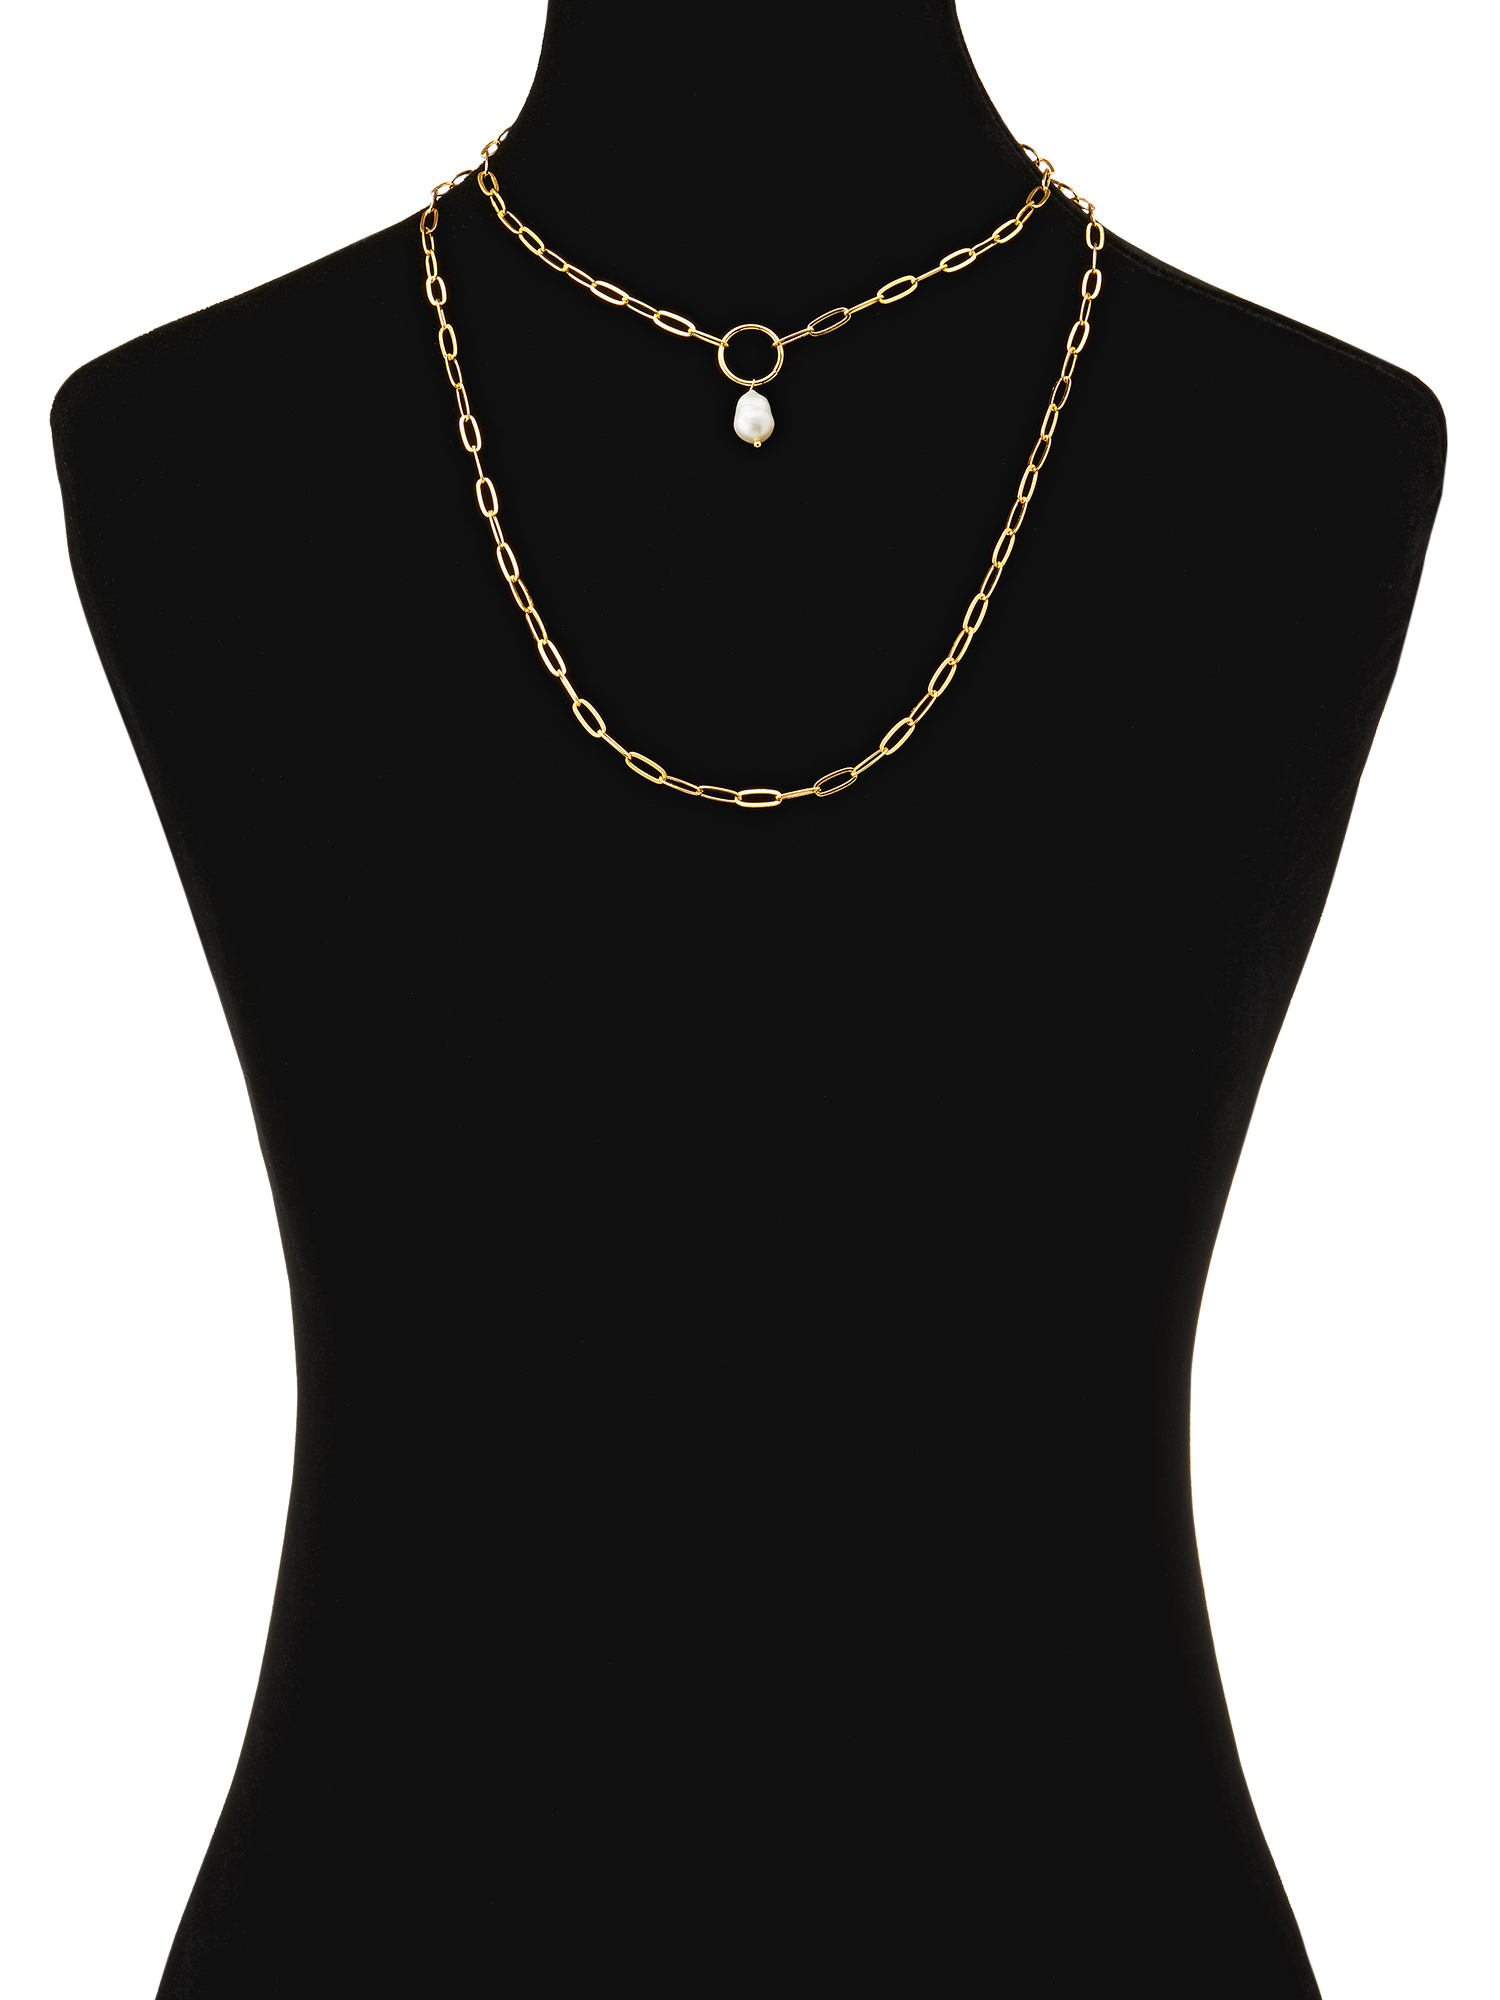 Scoop Brass Yellow Gold-Plated Layered Imitation Pearl Link Necklace, 15" + 3" Extender - image 2 of 4